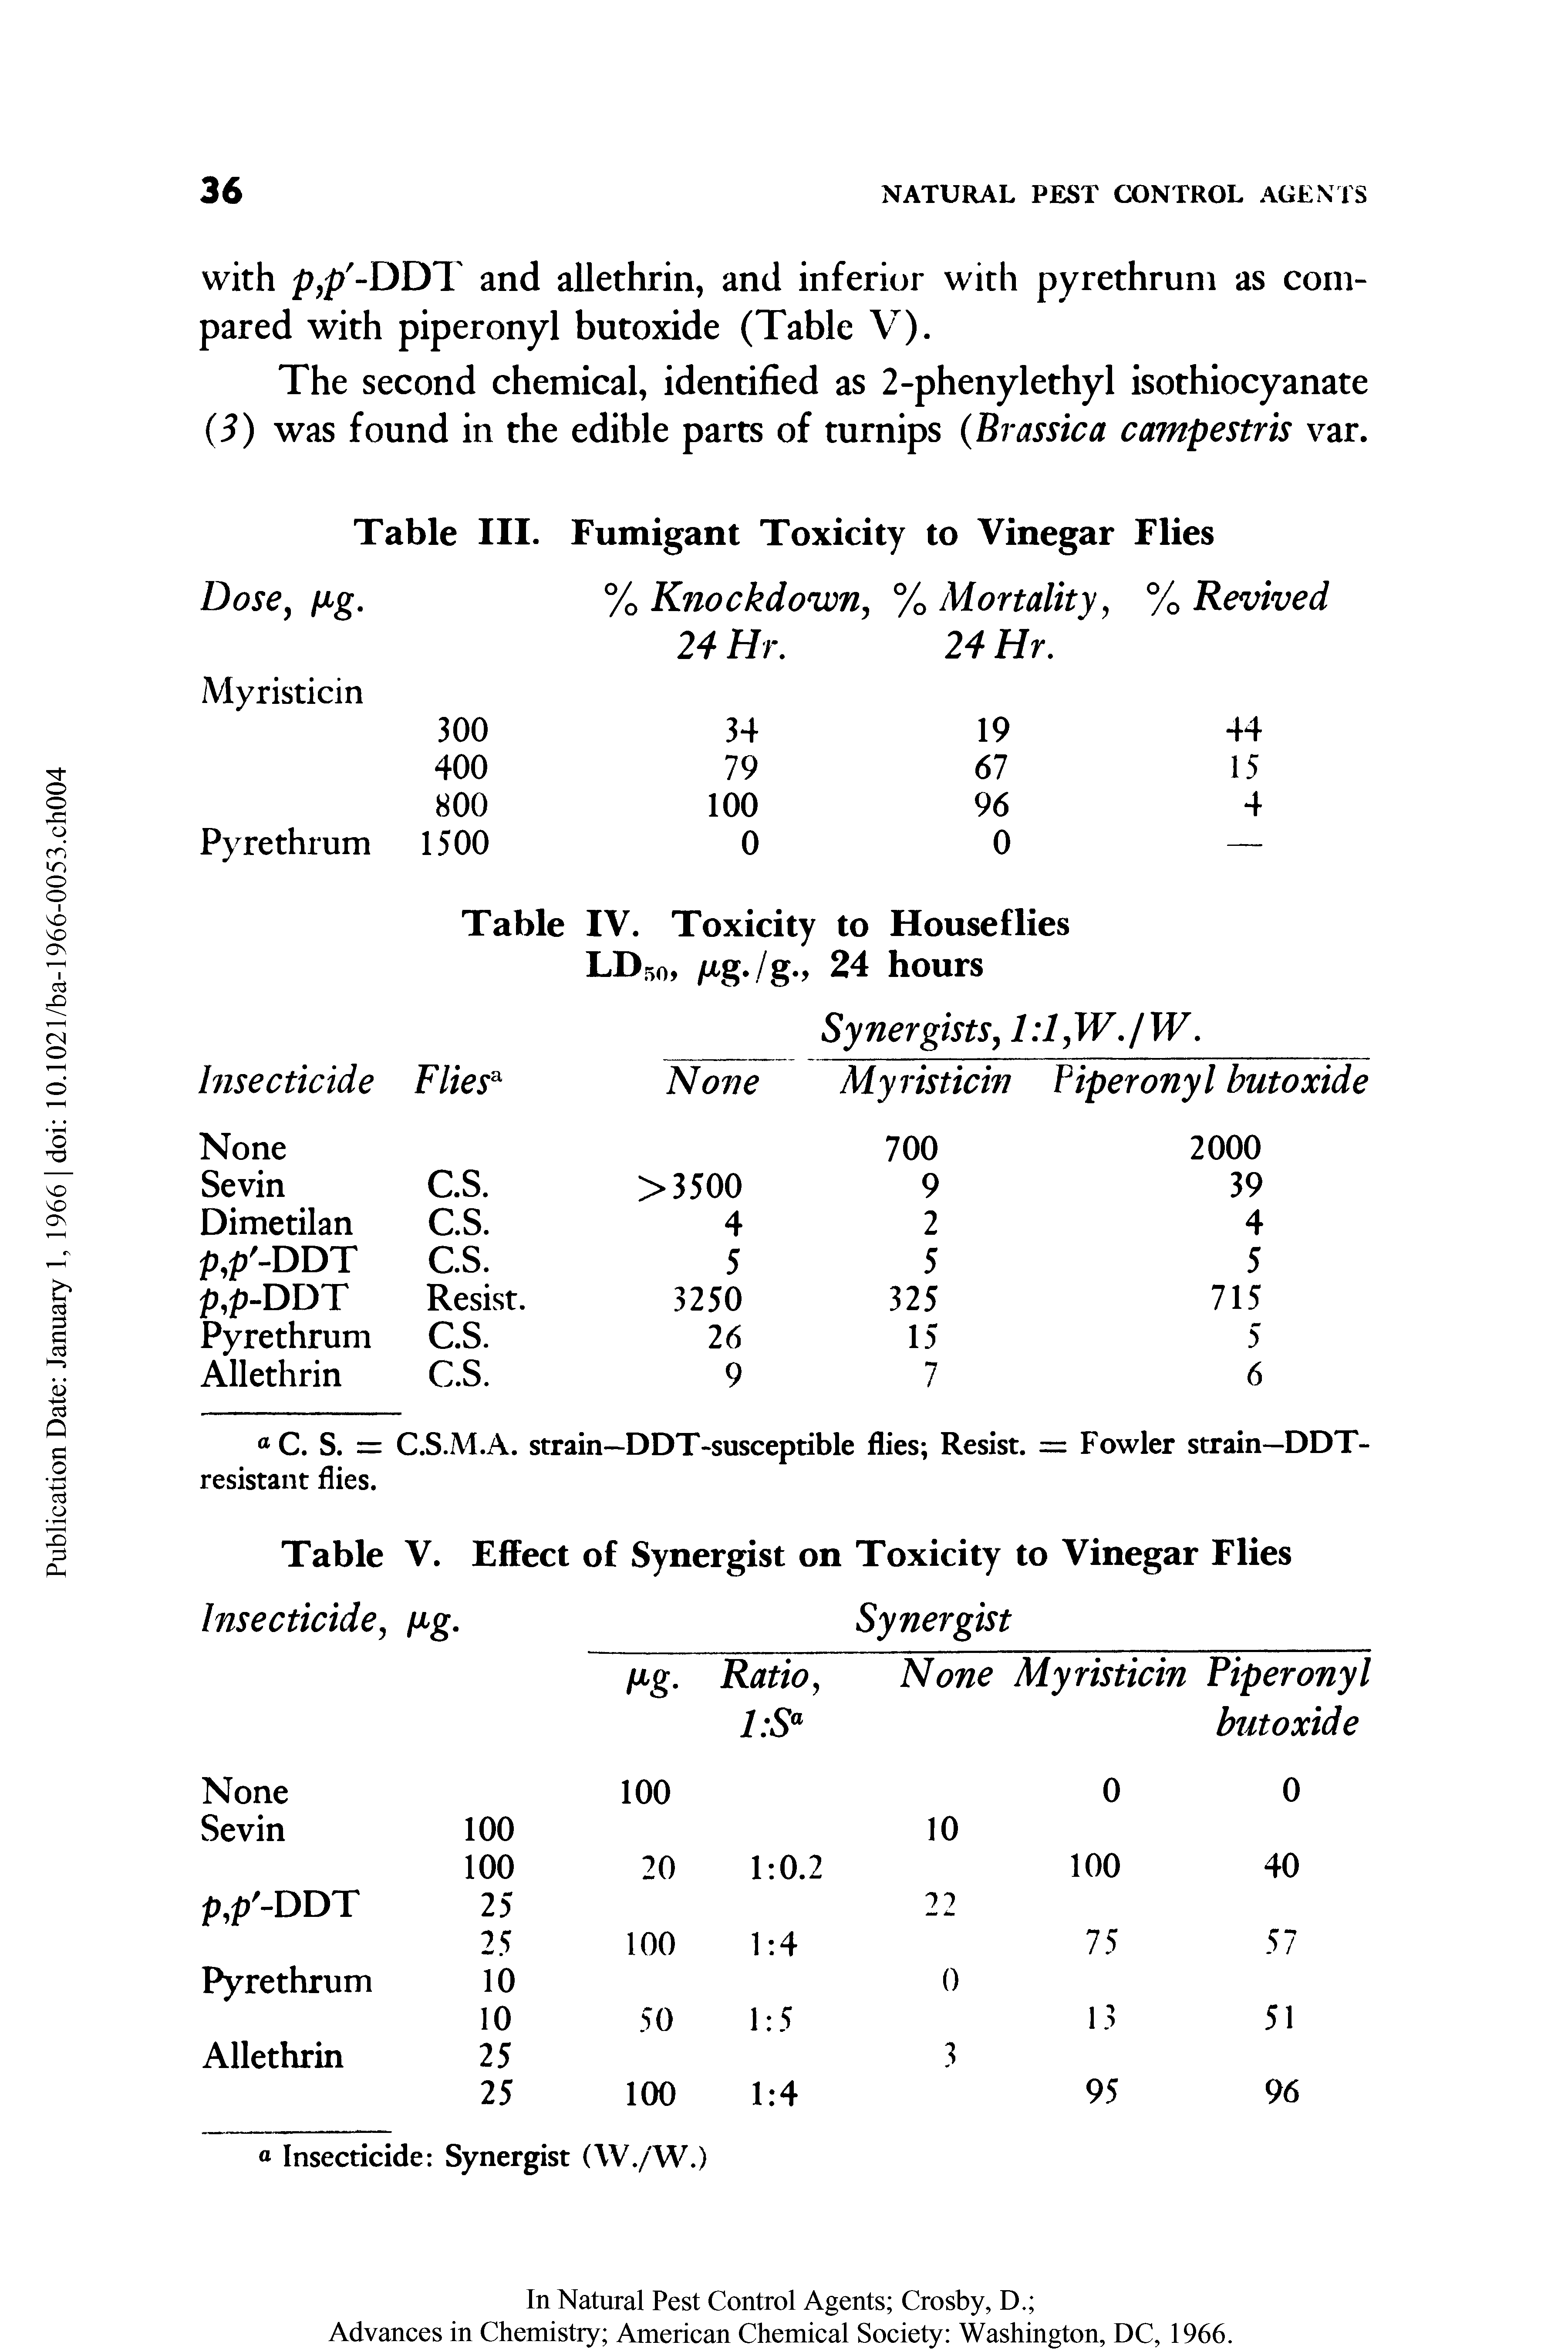 Table V. Effect of Synergist on Toxicity to Vinegar Flies ...